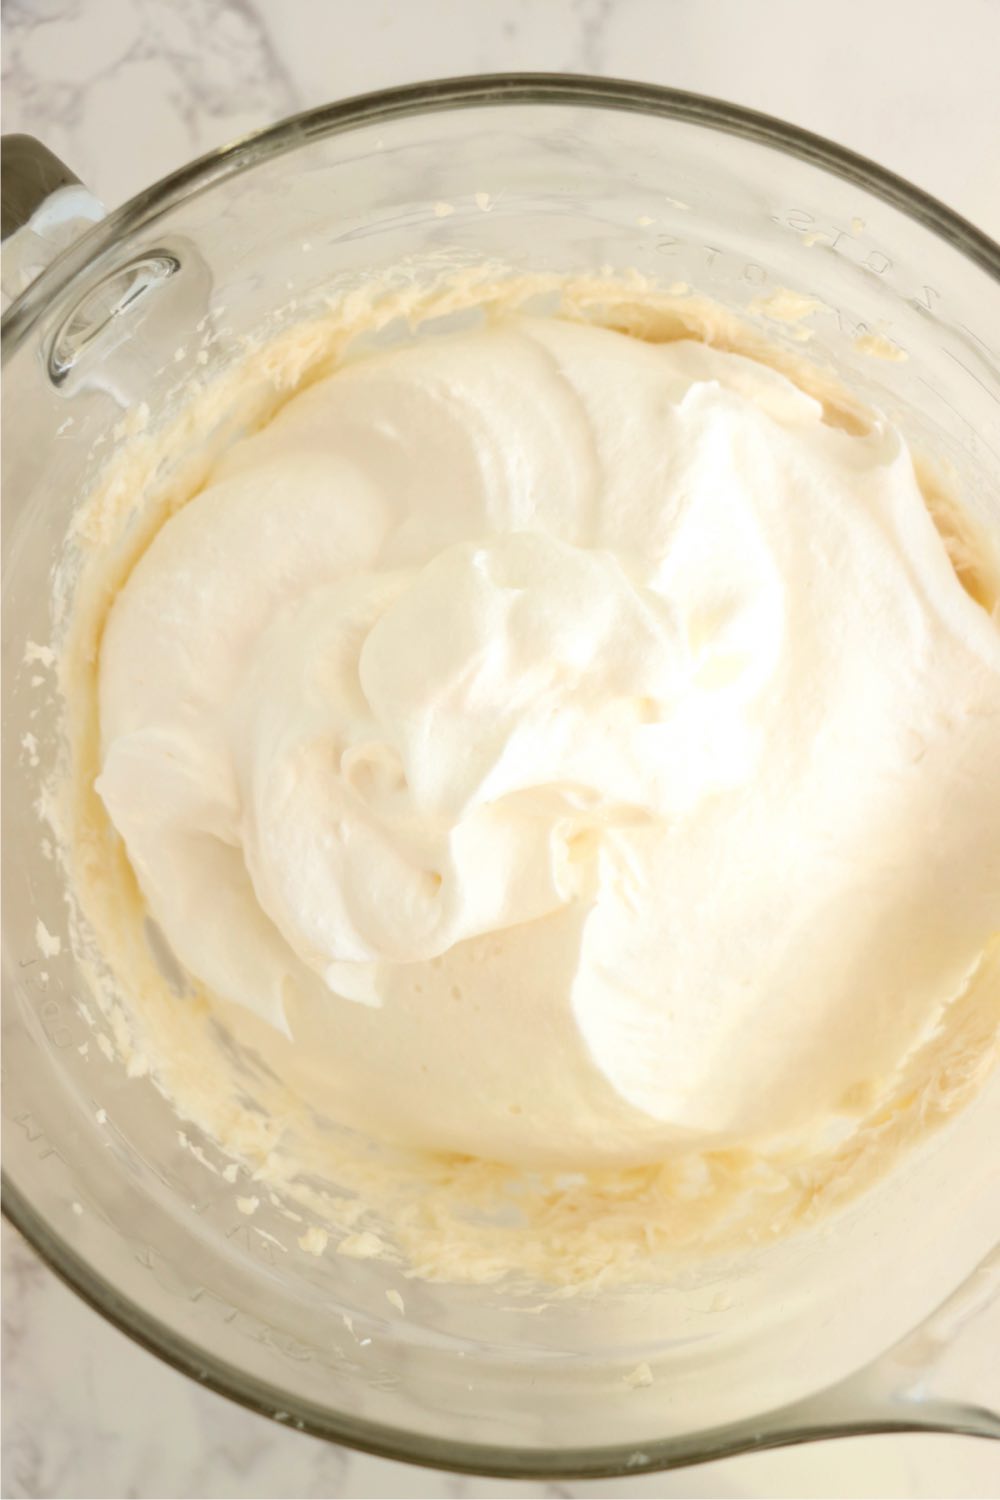 Whipped topping added to cream cheese mixture in a glass bowl